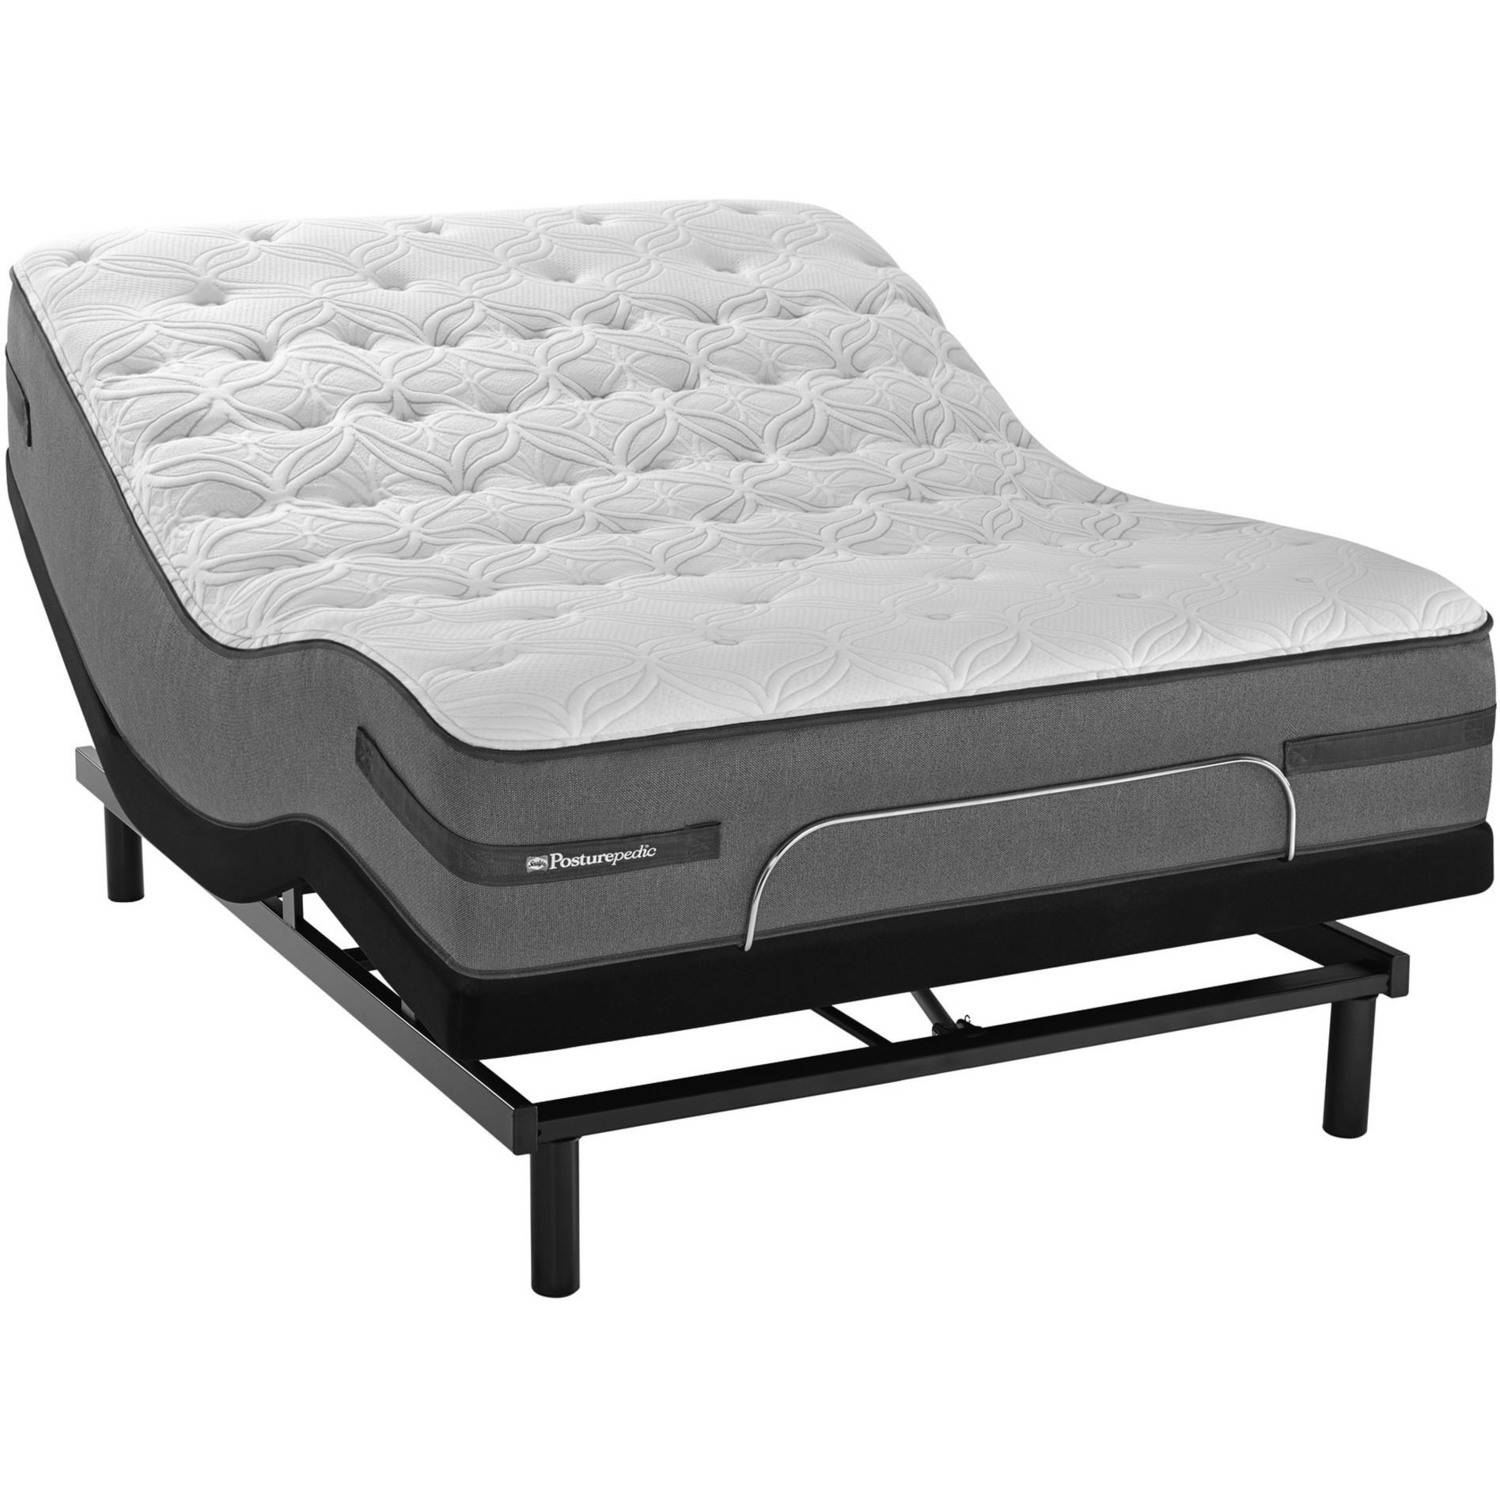 Sealy Ease Adjustable Bed Base 1.0, Twin XL - image 3 of 14